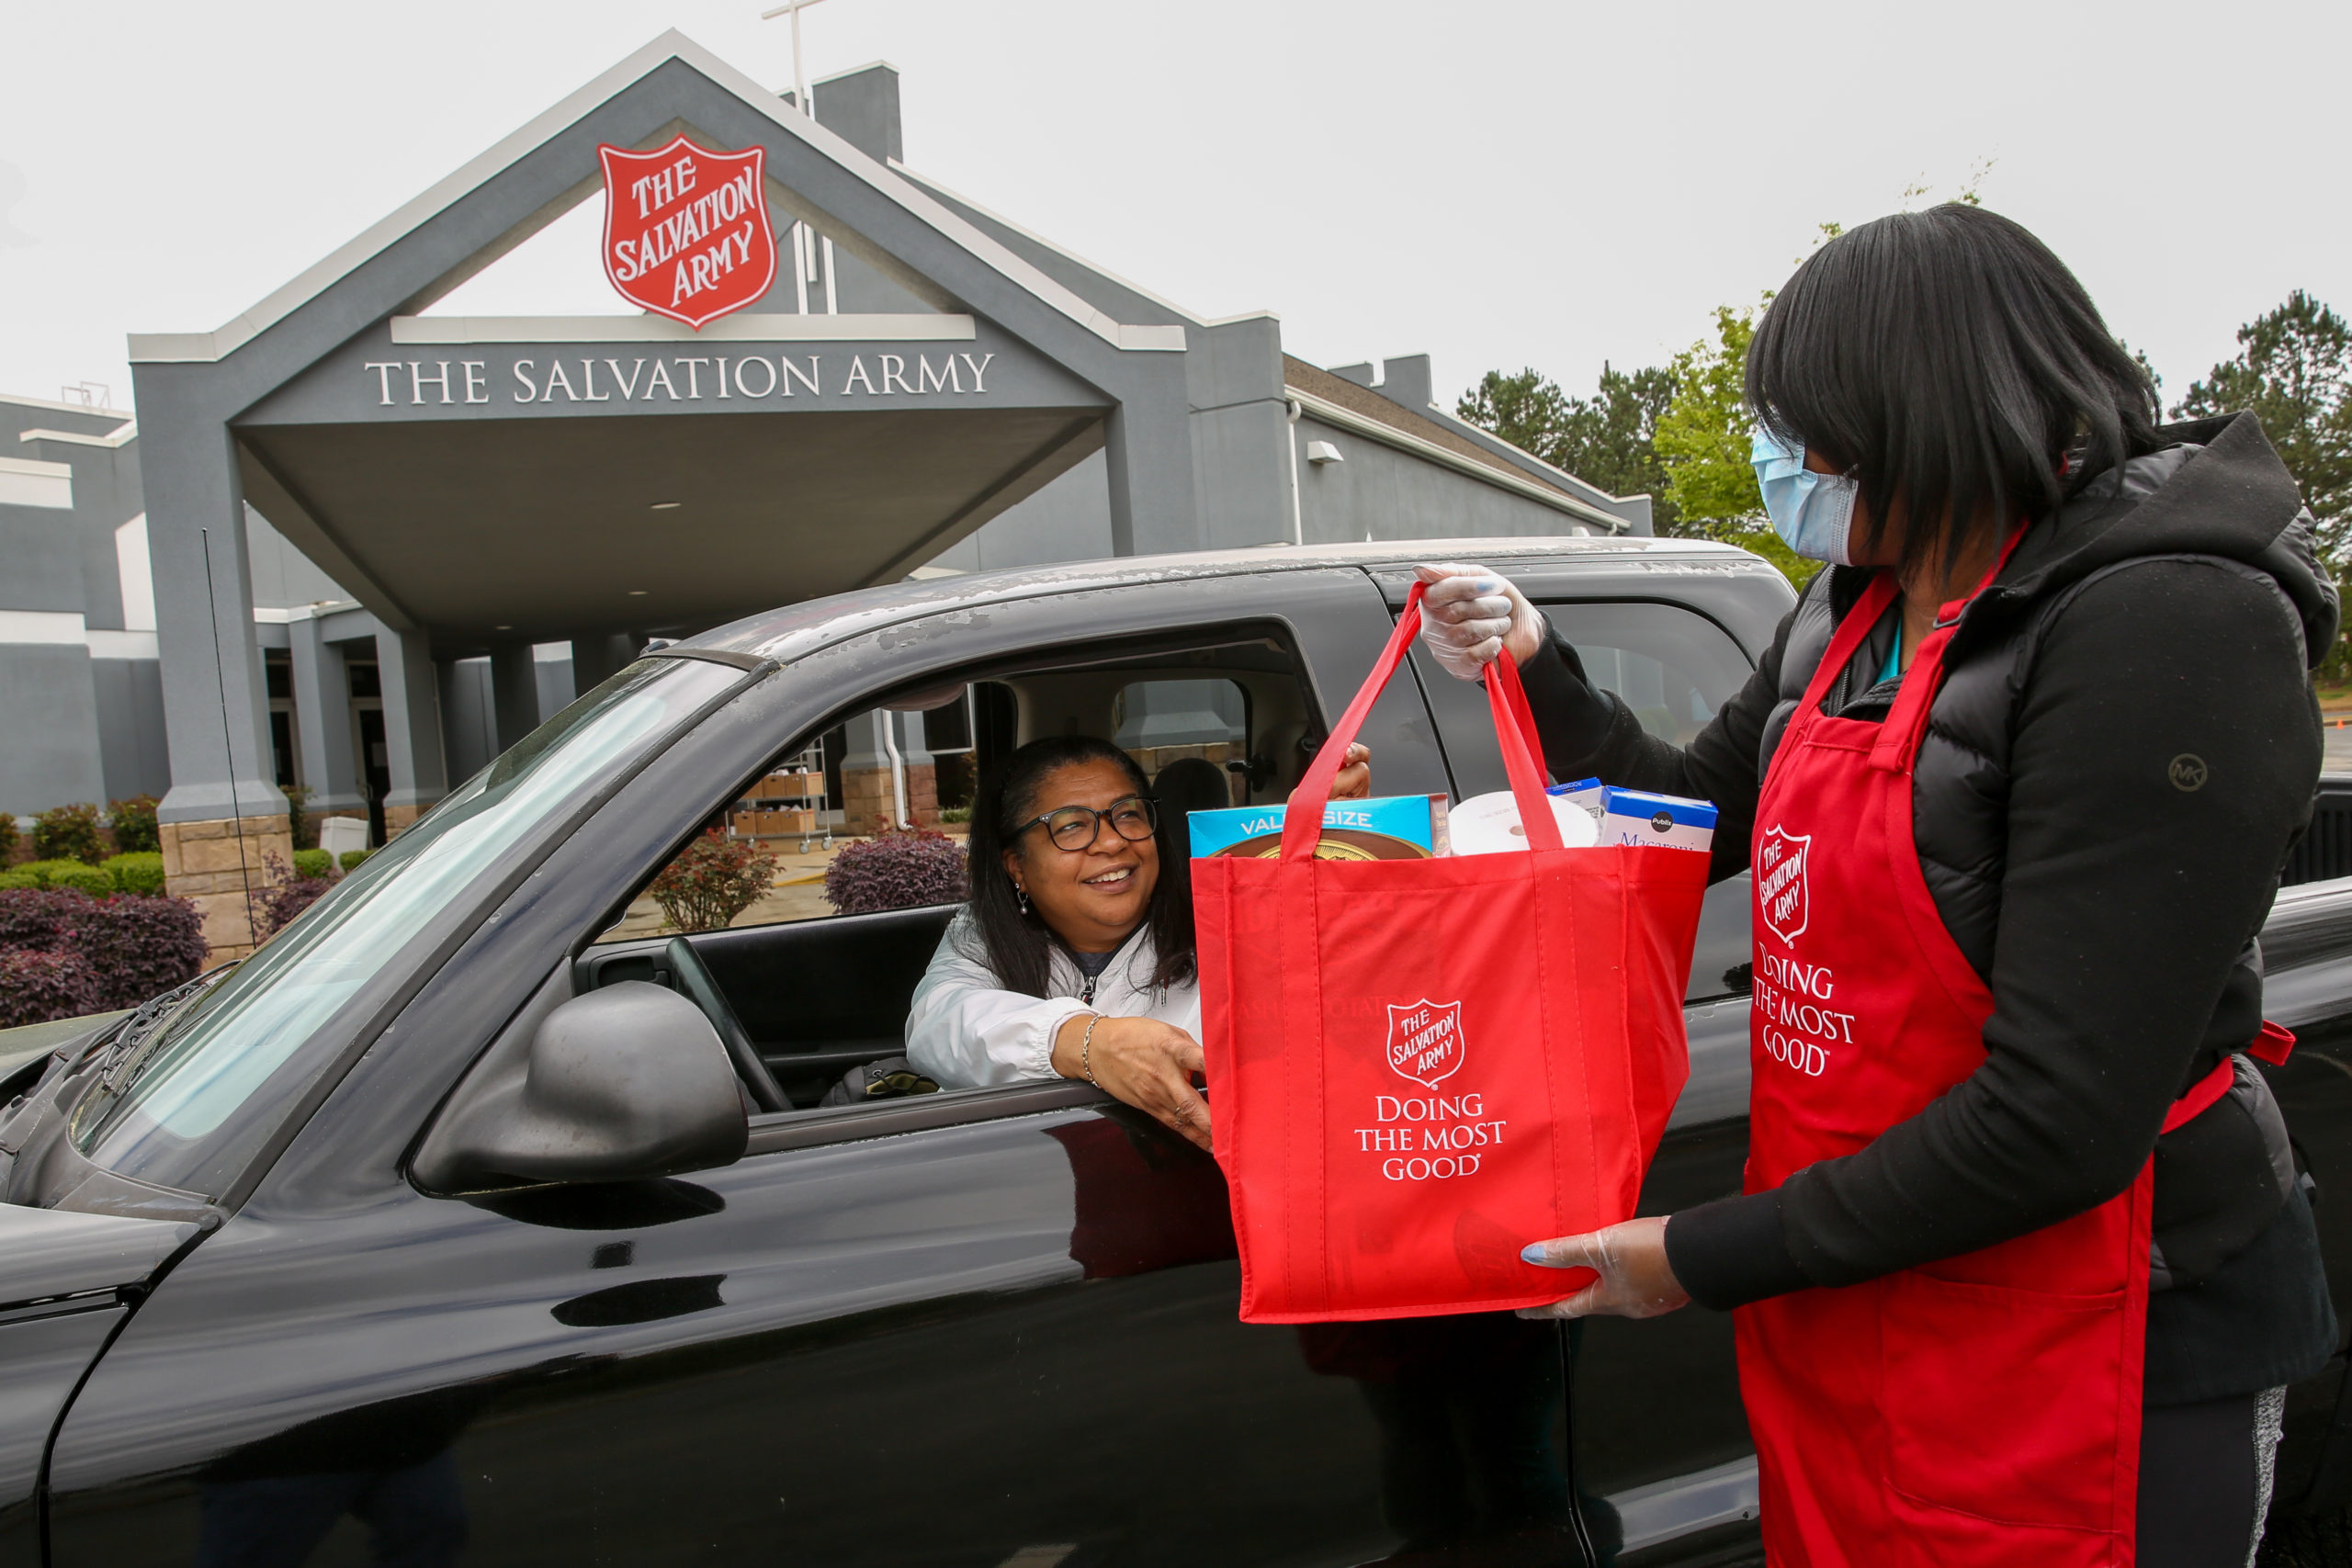 A Salvation Army workers hands a bag of food to a woman in a car in Georgia.